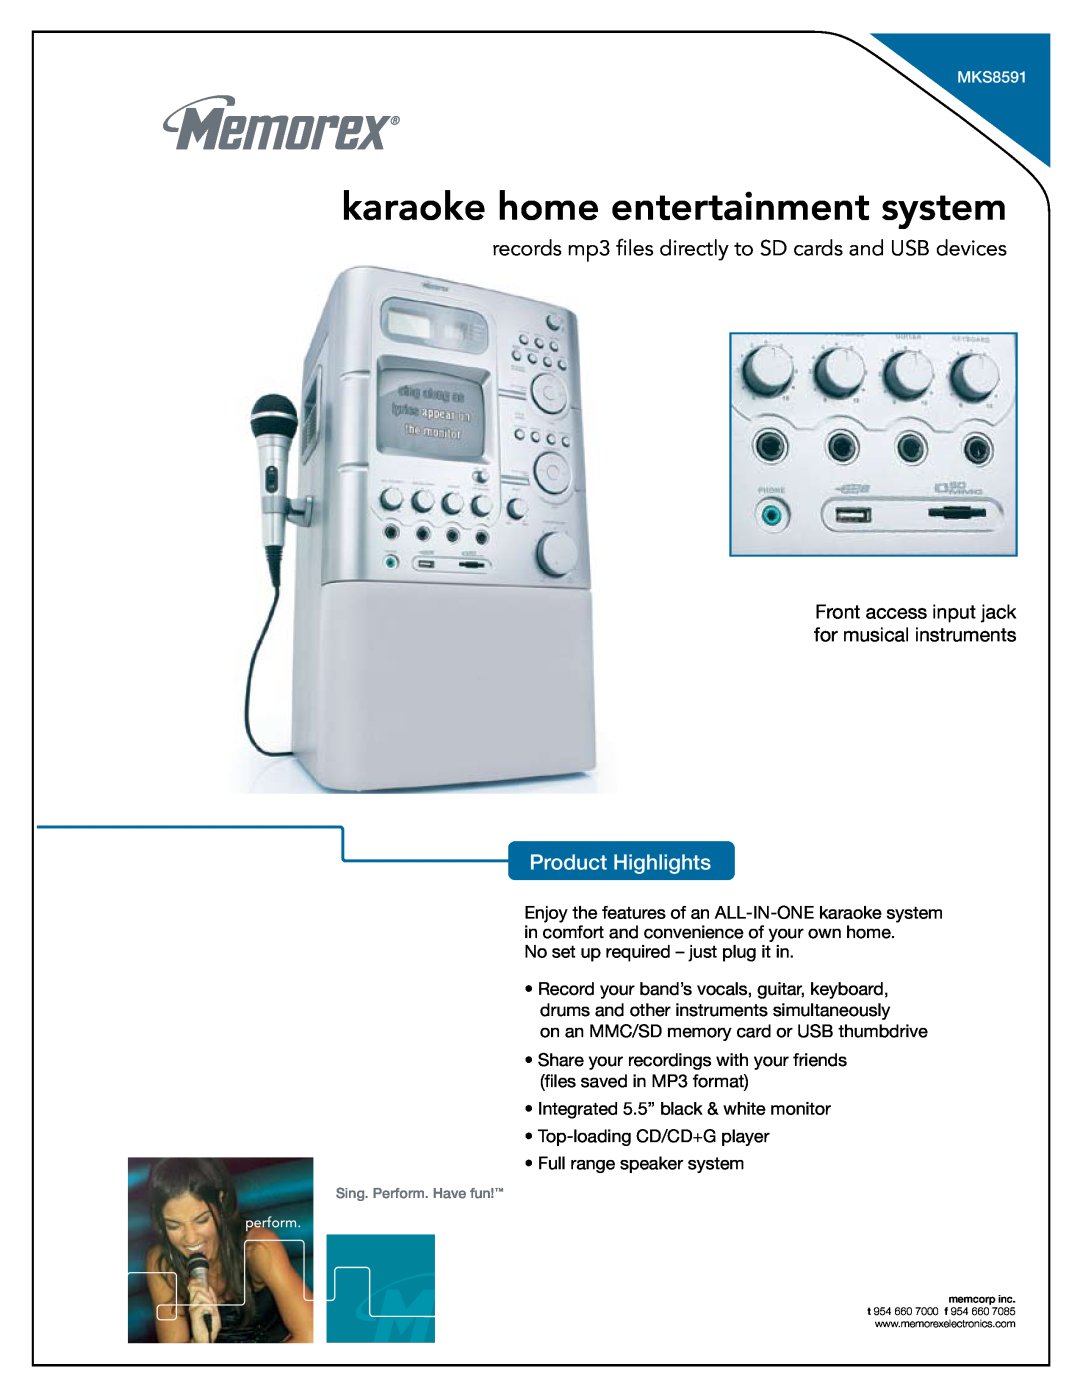 Memorex MKS8591 manual karaoke home entertainment system, Product Highlights Product Highlights 